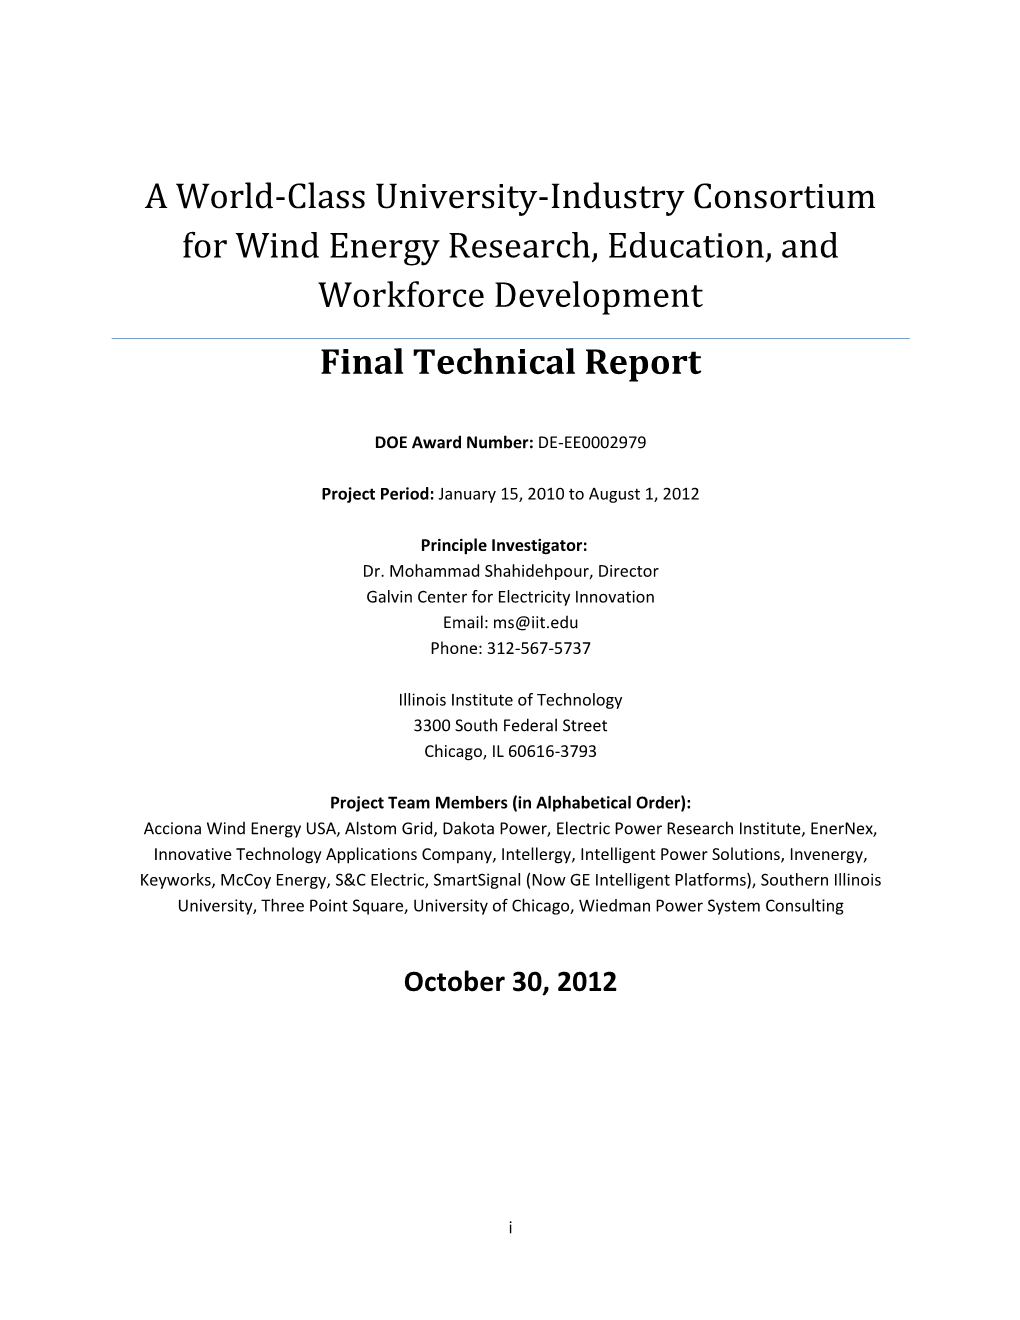 A World-Class University-Industry Consortium for Wind Energy Research, Education, and Workforce Development Final Technical Report